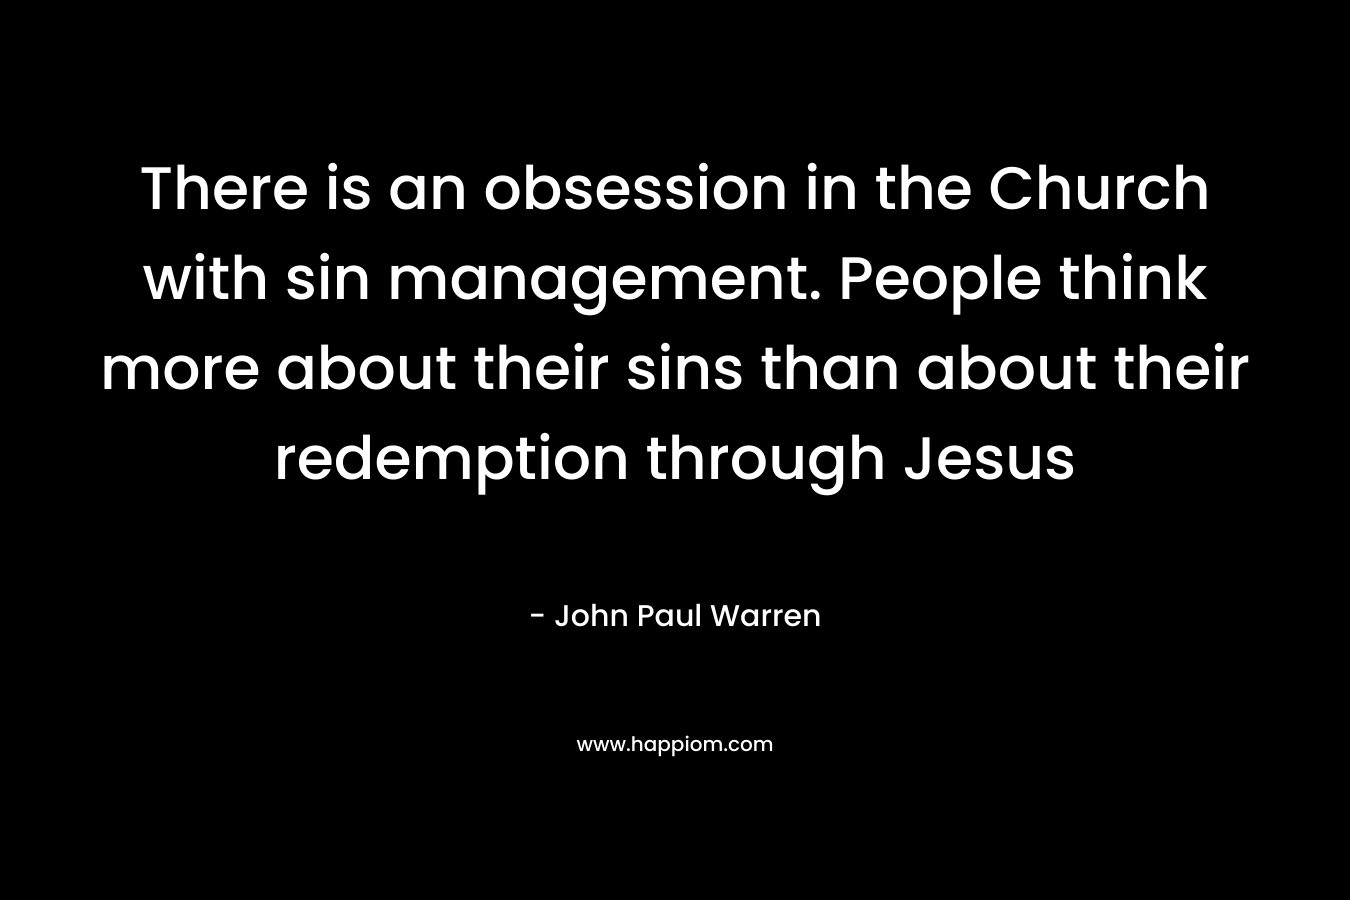 There is an obsession in the Church with sin management. People think more about their sins than about their redemption through Jesus